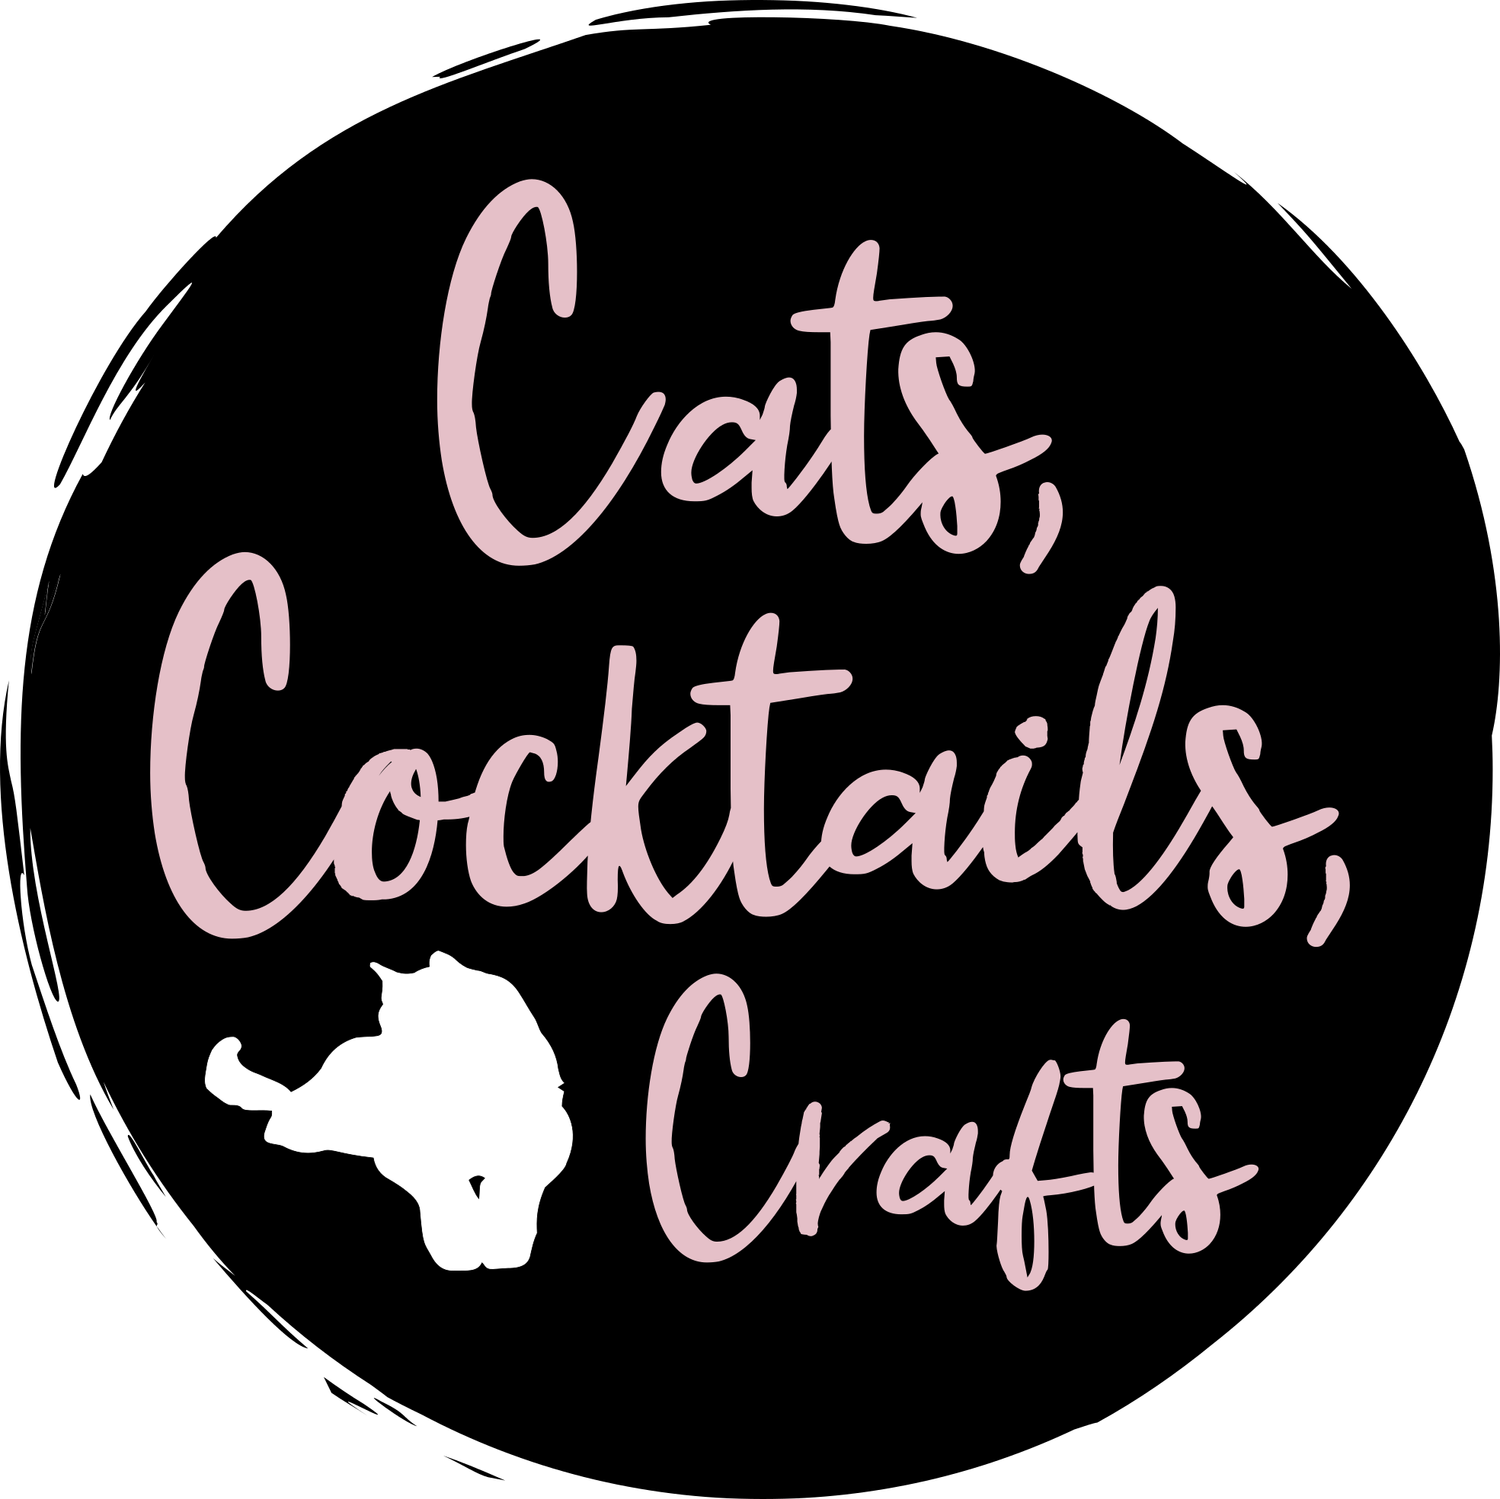 Cats, Cocktails, Crafts